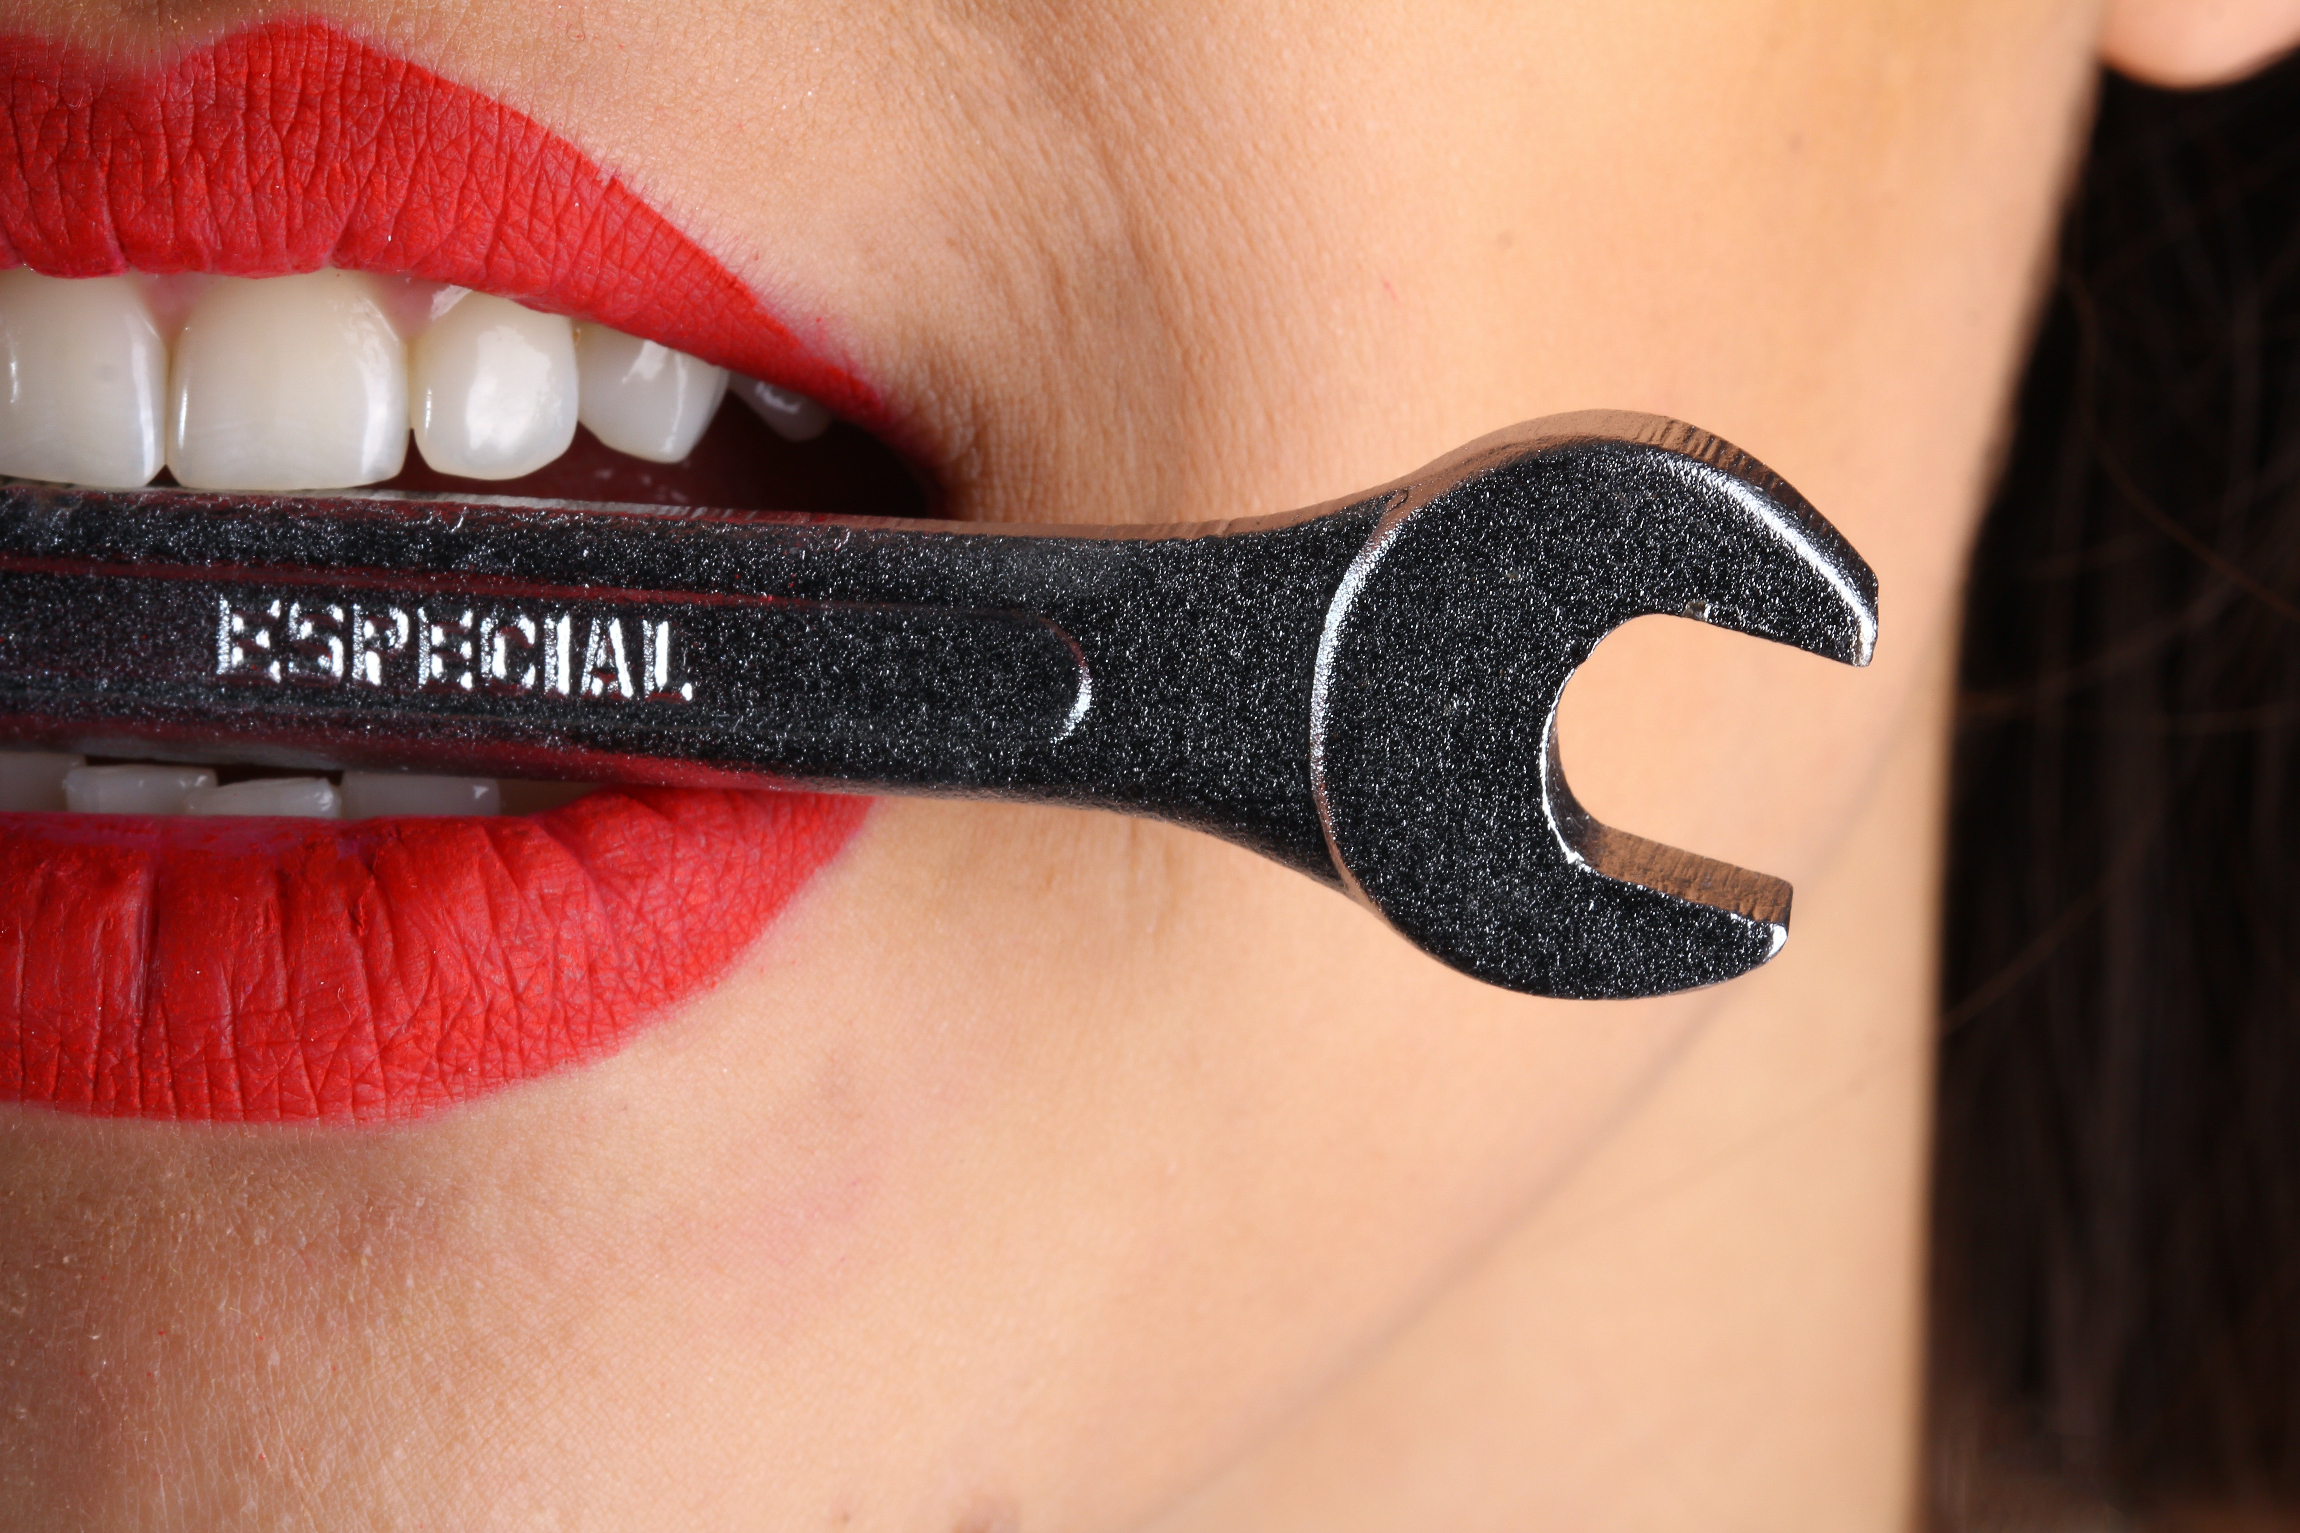 An individual holding a wrench between their teeth. | Source: Pexels